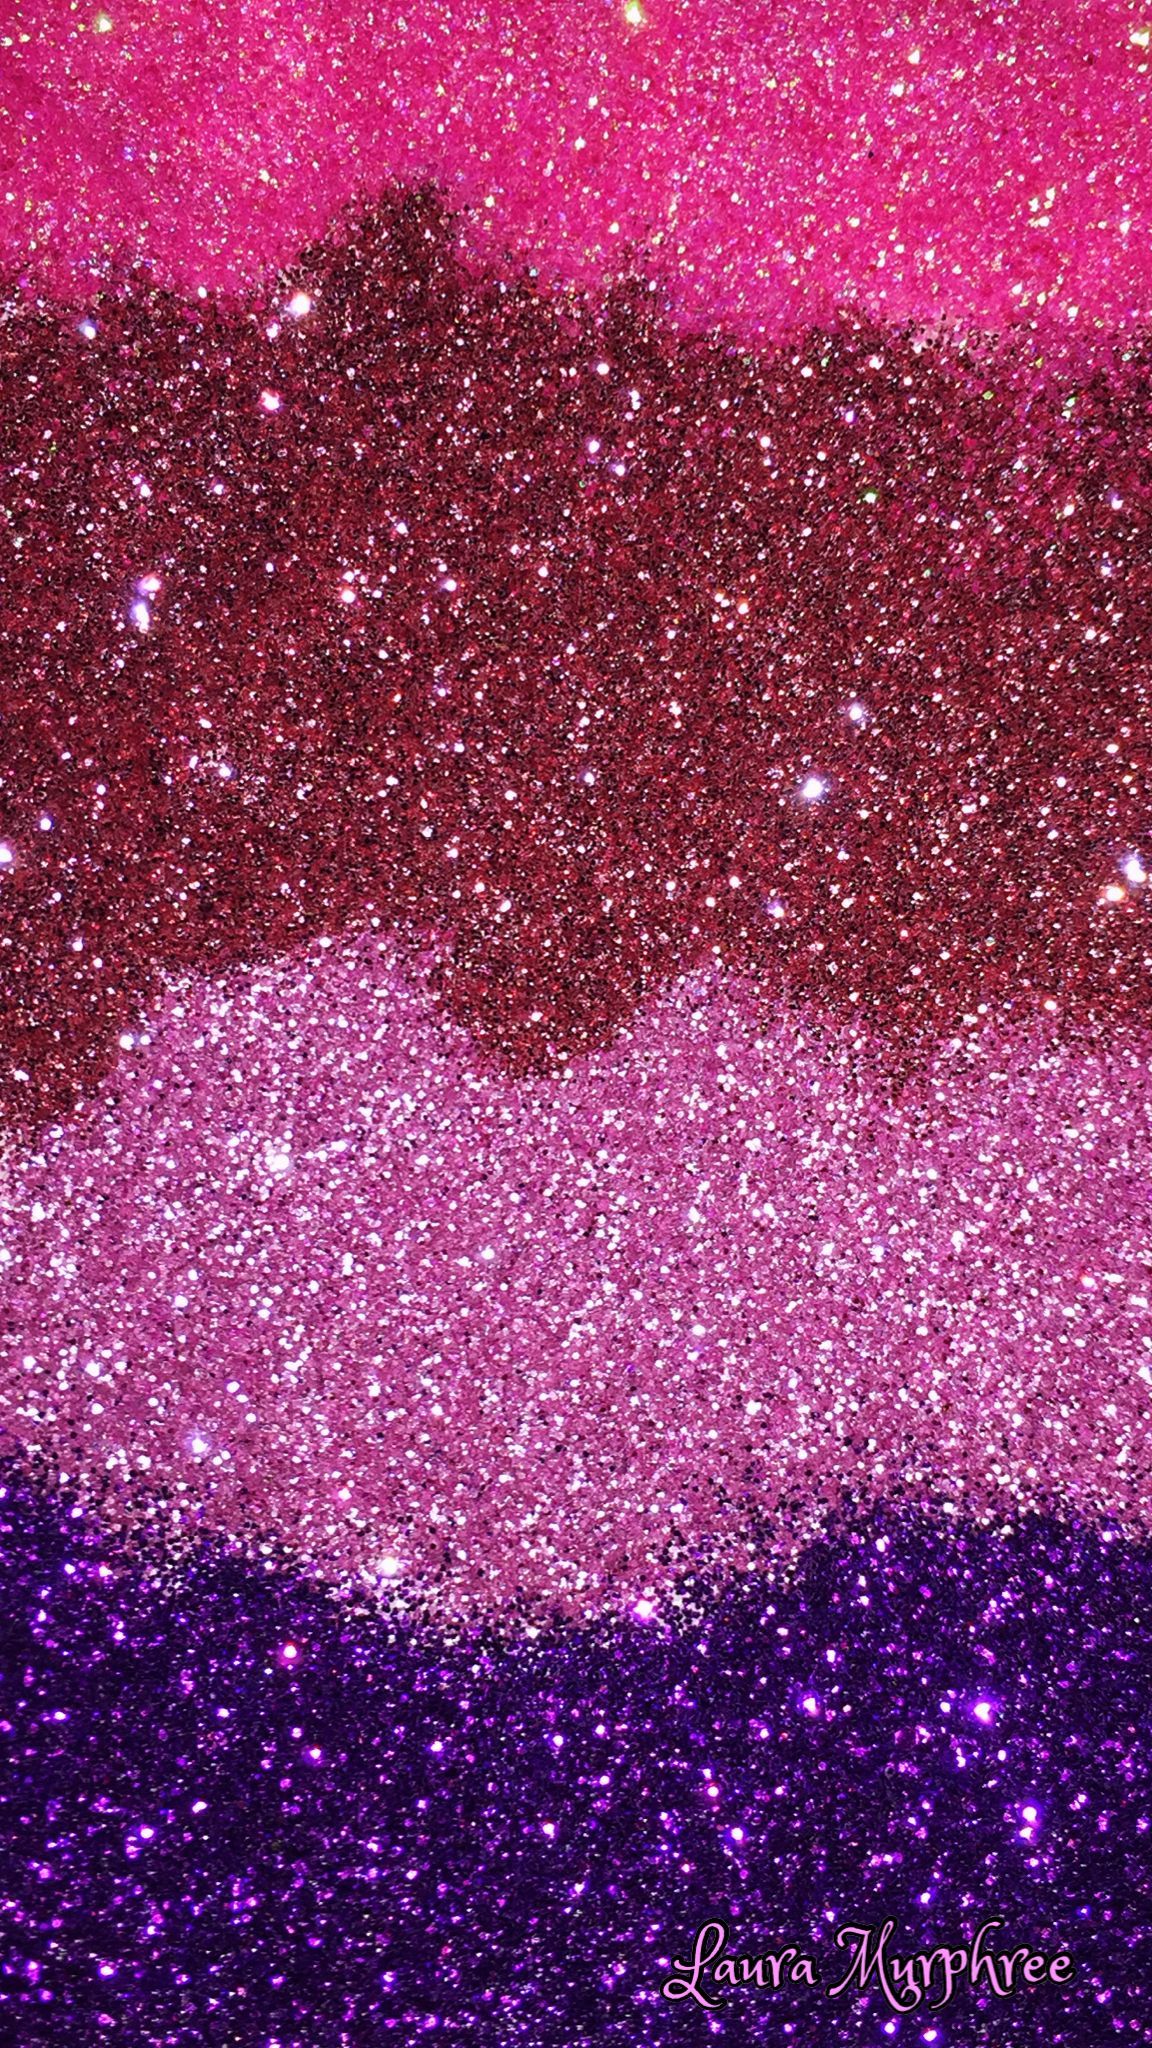 Glitter Cute Girly For Iphone Wallpapers